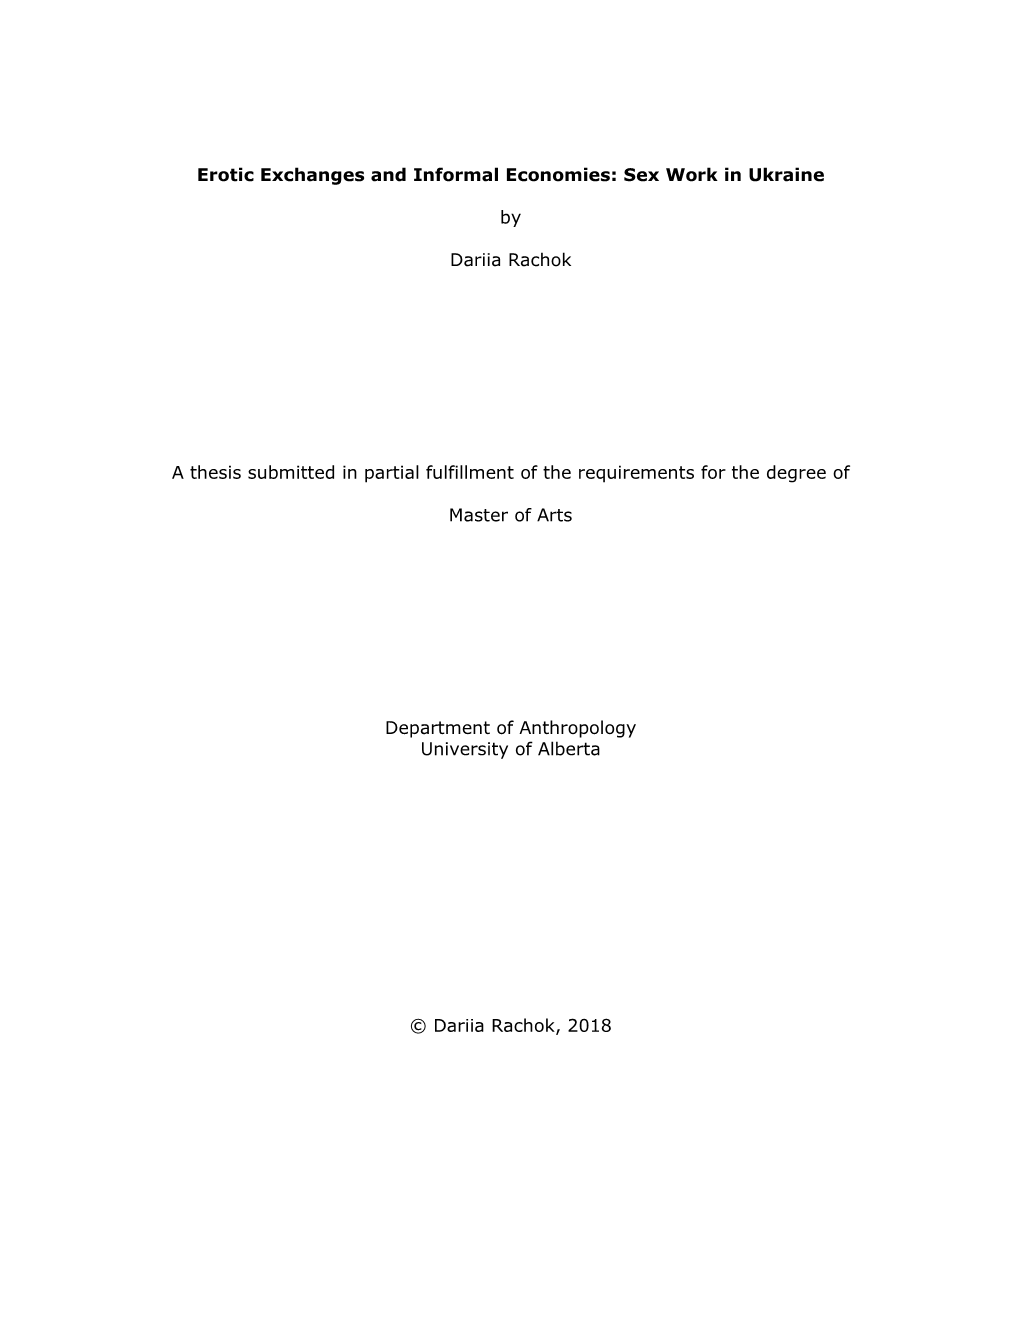 Sex Work in Ukraine by Dariia Rachok a Thesis Submitted in Partial Fulfillment Of